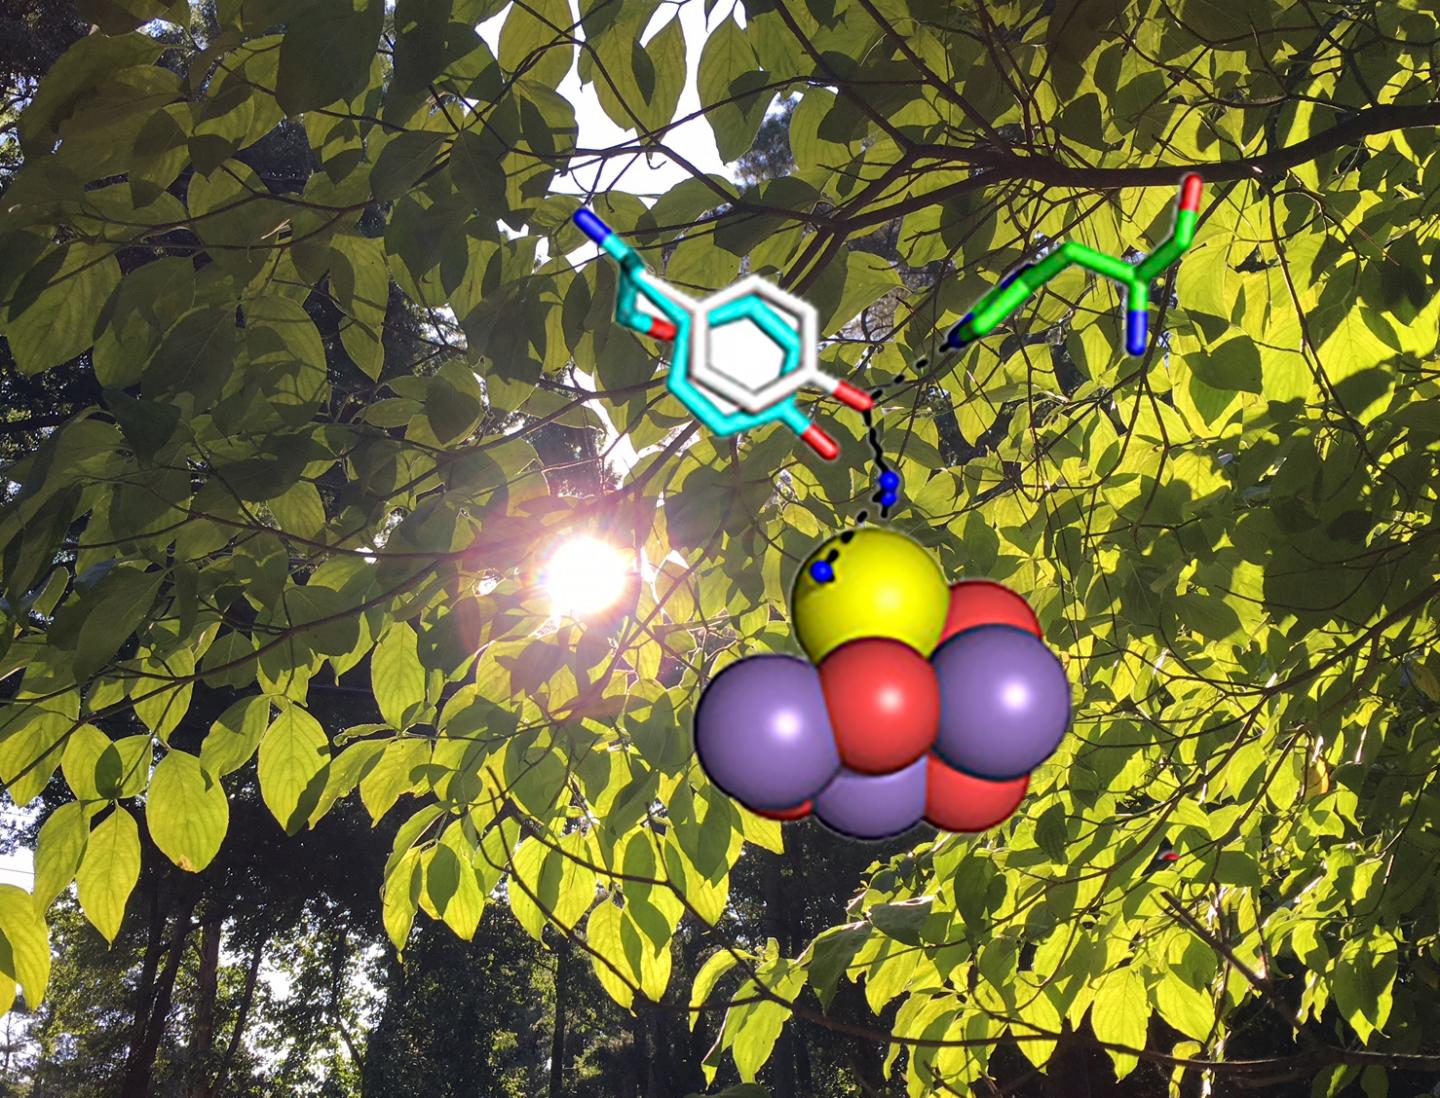 Oxygen Photosynthesis at the Hands of a Metal Cluster